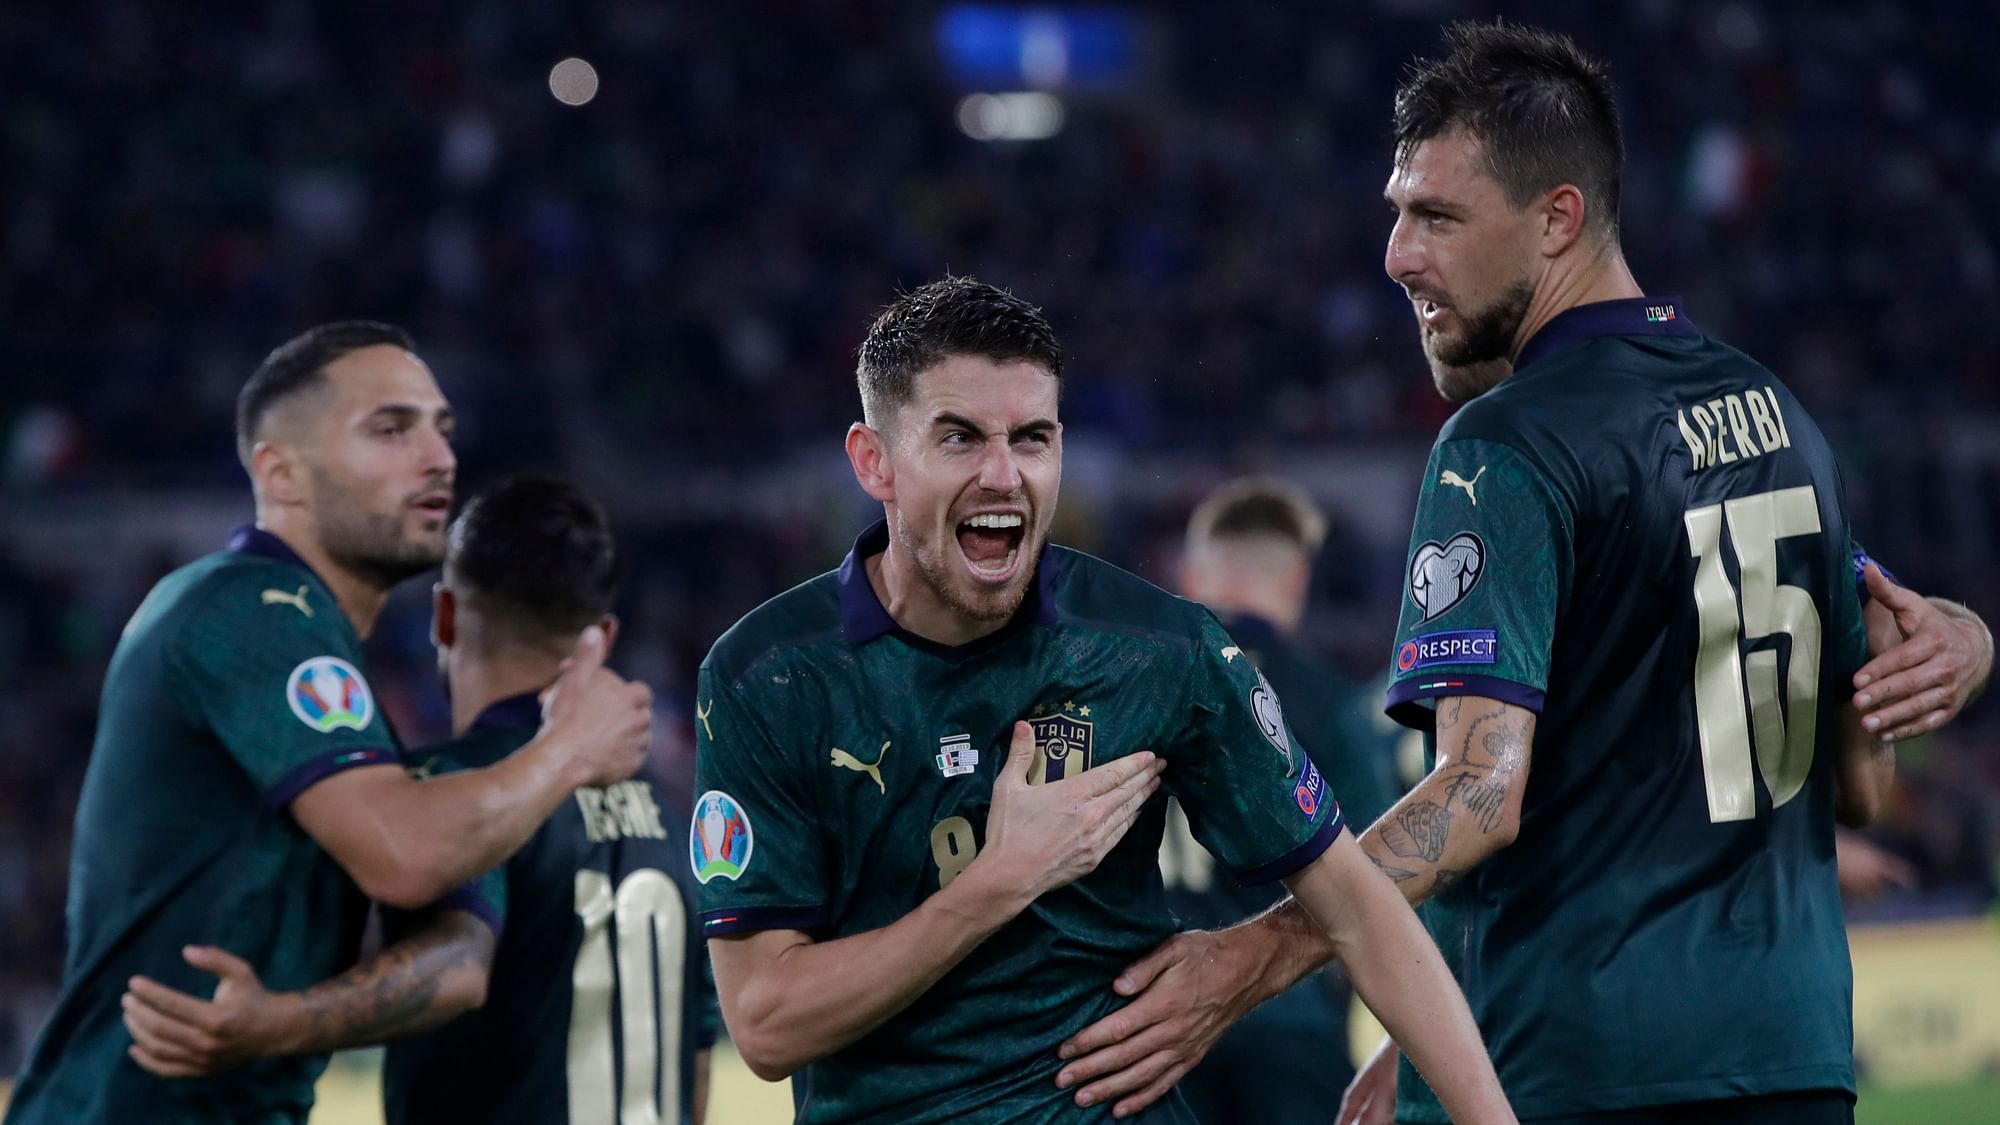  Italy did stay perfect by overcoming Greece’s defensive tactics in a 2-0 victory and qualified for next year’s continent-wide tournament.